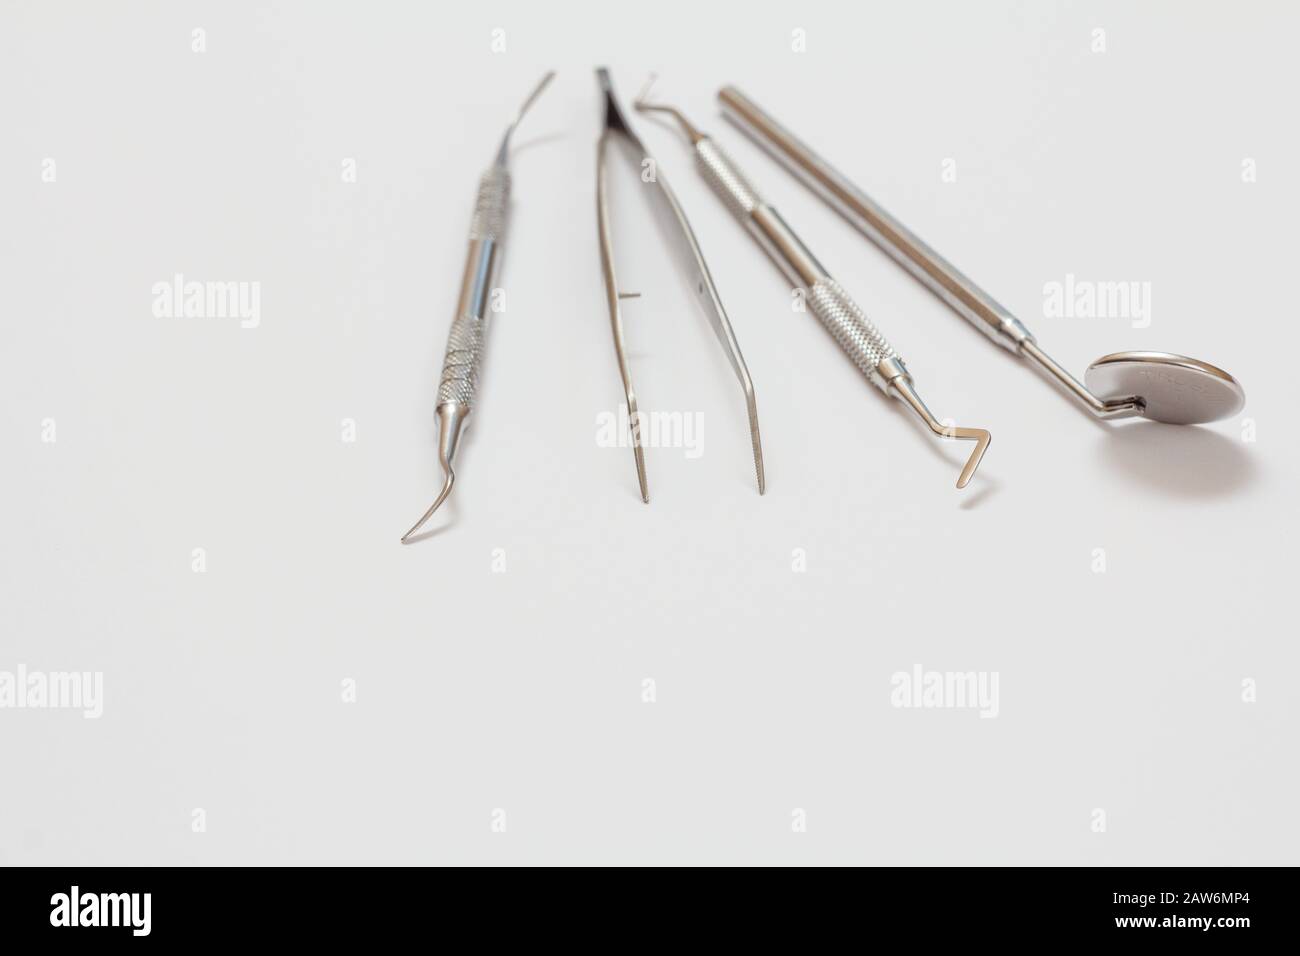 Set of composite filling instruments for dental treatment on white background. Medical tools concept. Close-up view. Shallow depth of field. Stock Photo